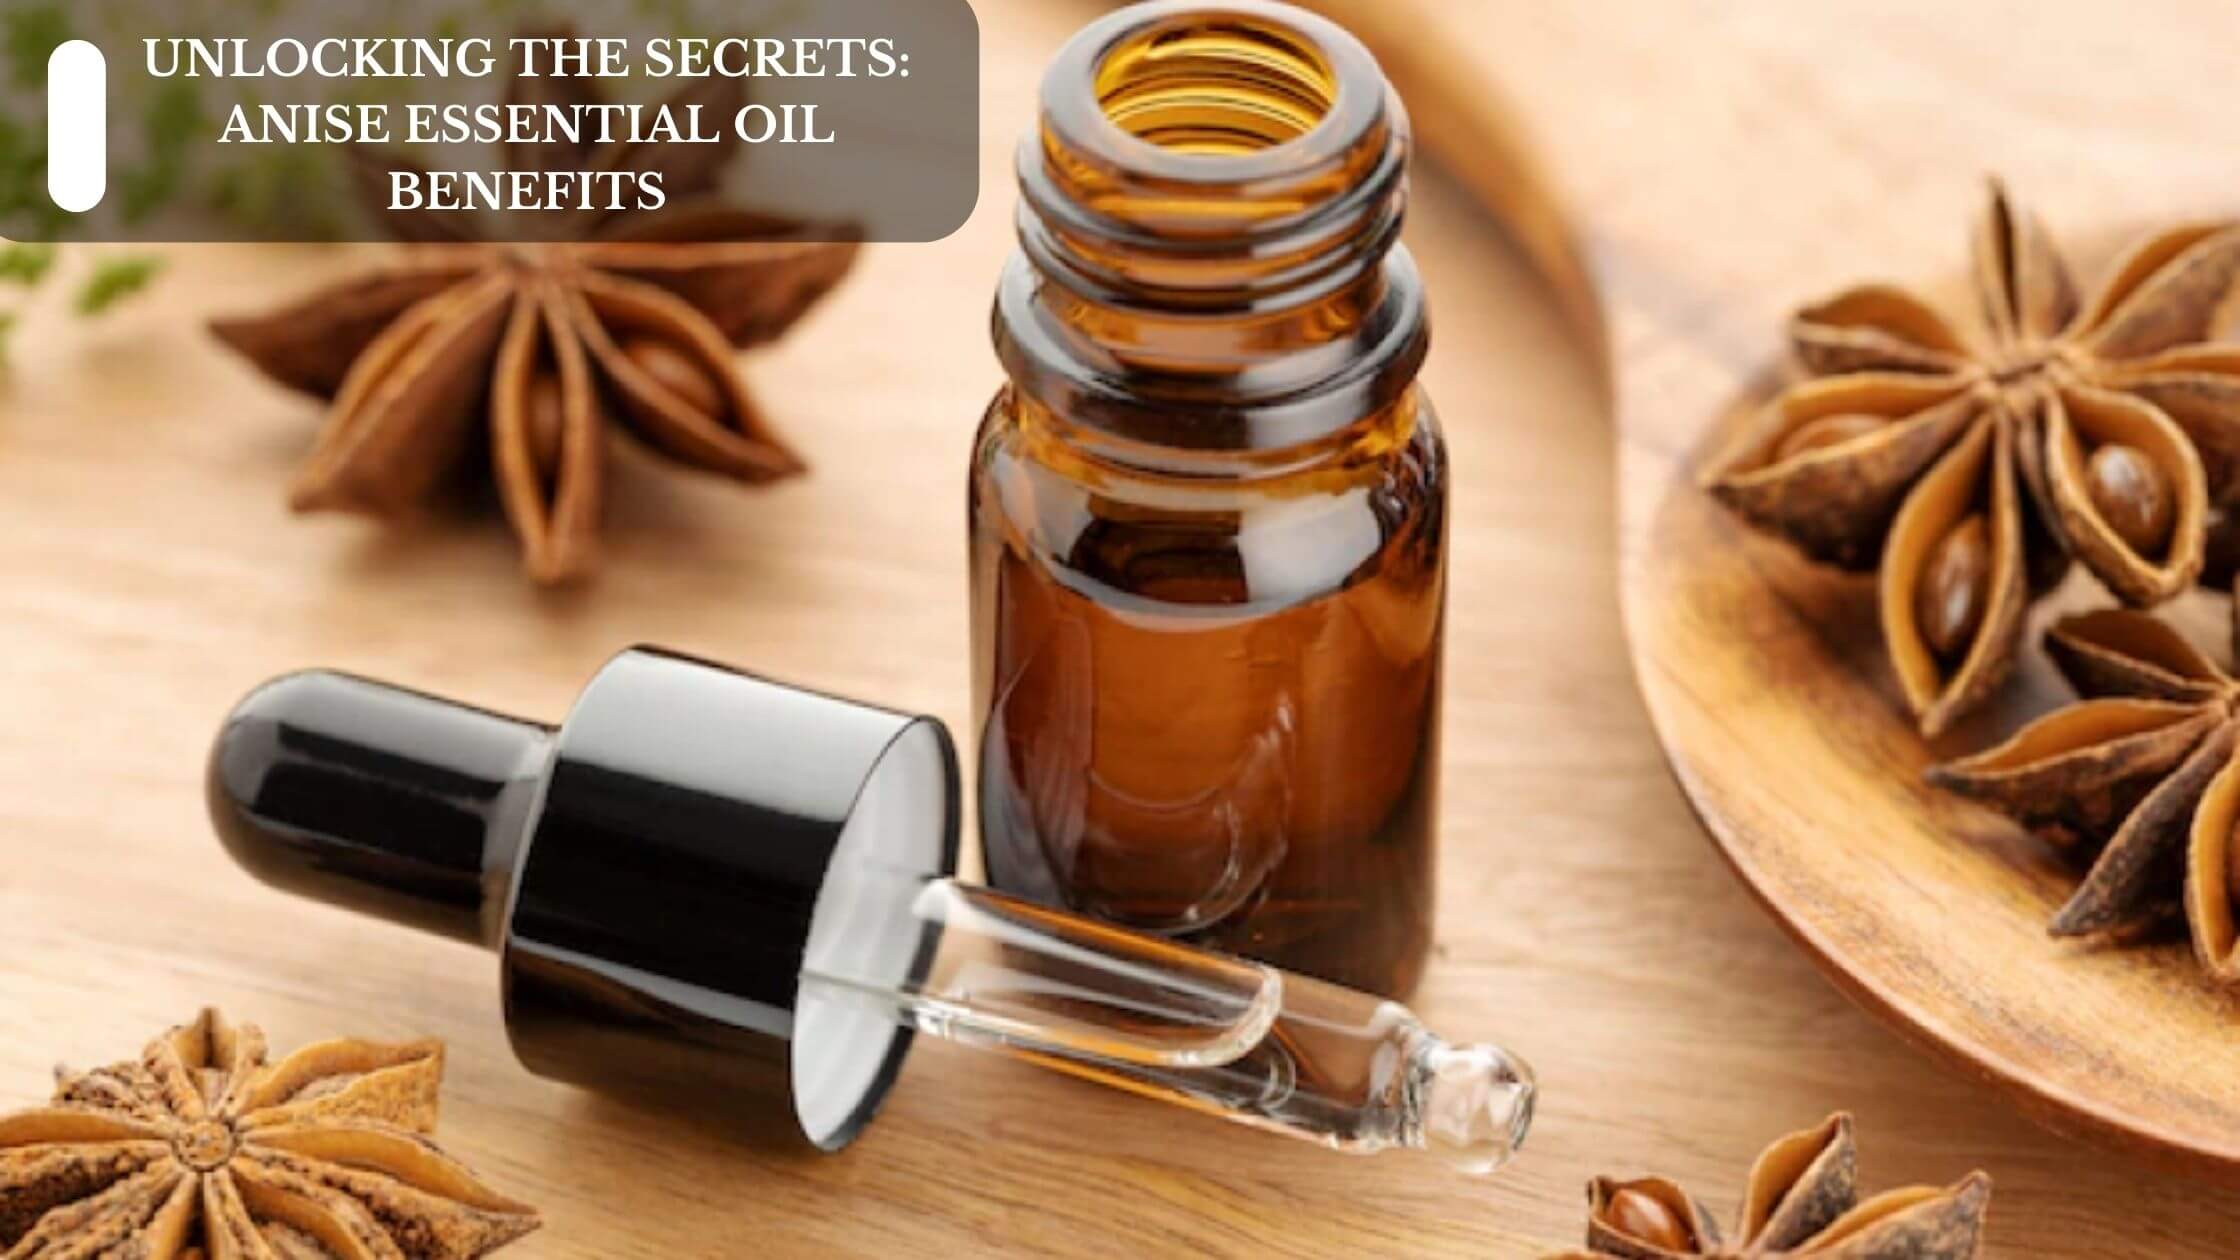 Cinnamon Essential Oil Uses: More Than Just A Spice – Moksha Lifestyle  Products